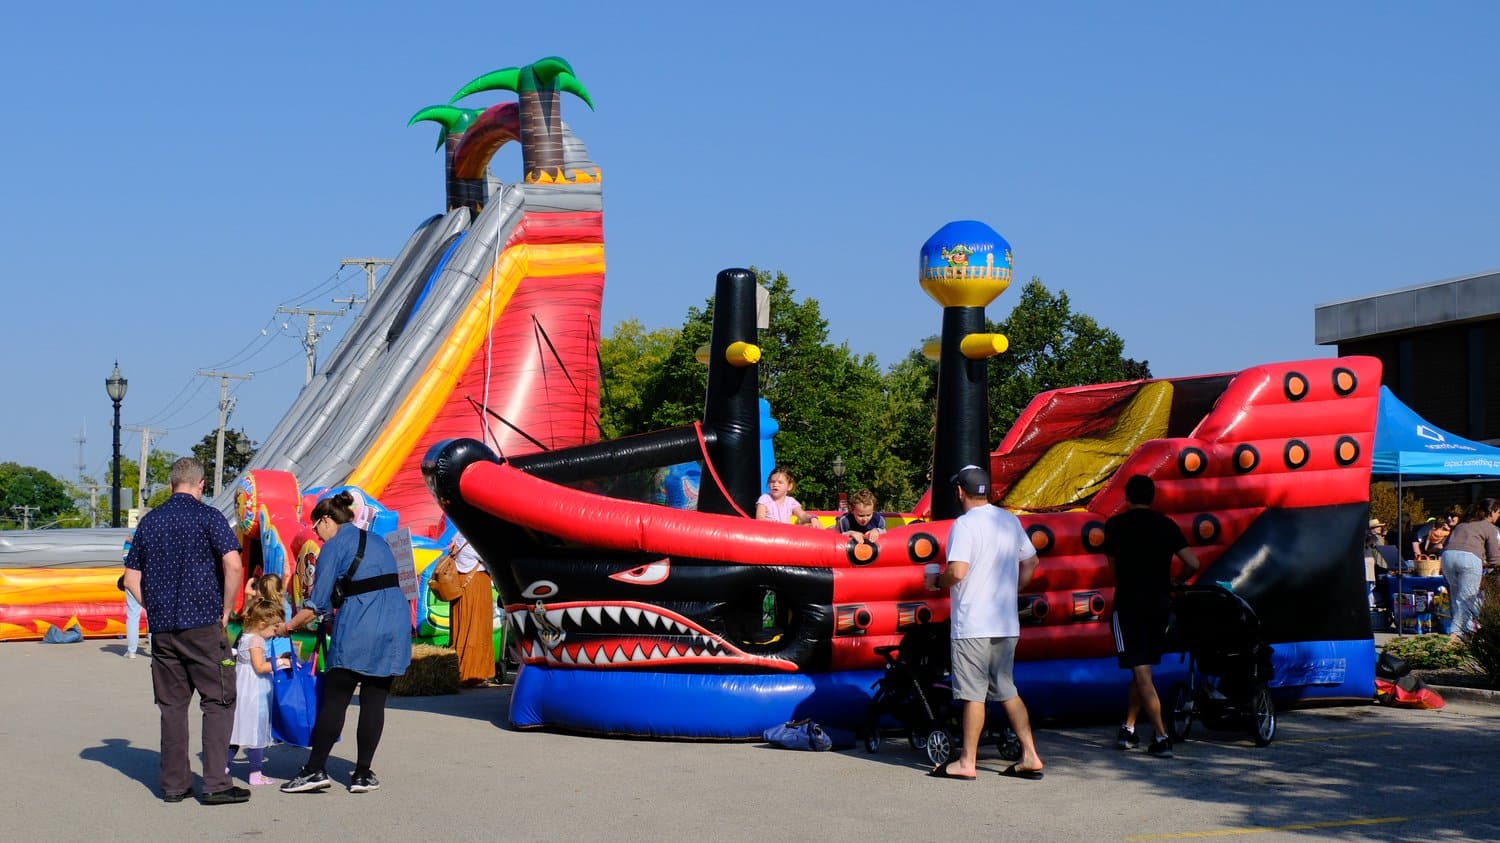 Inflatable pirate ship and the giant slide.